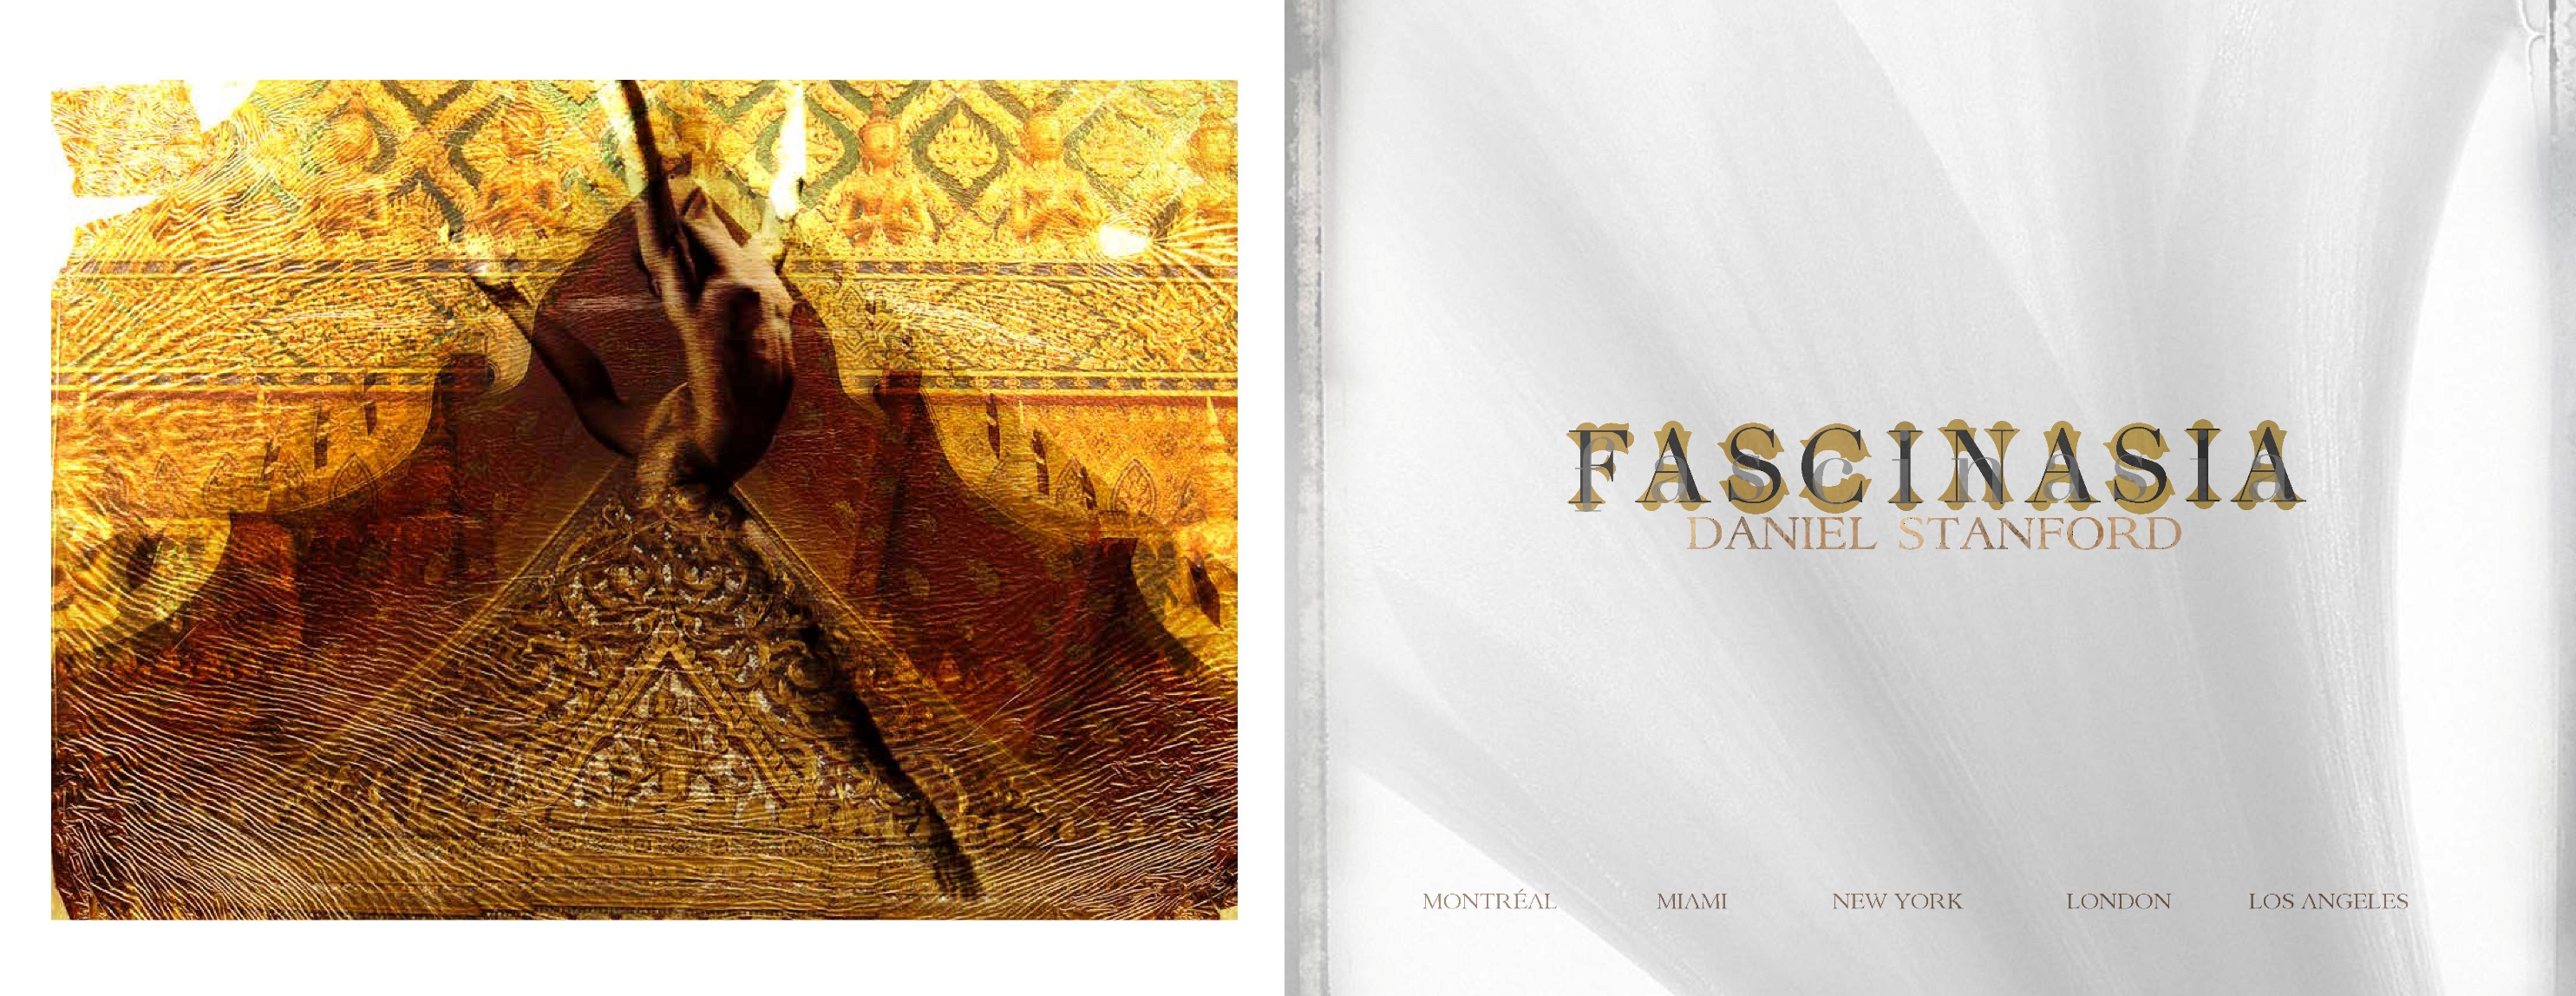 Artist Daniel Stanford most coveted works "FASCINASIA", a finely detailed coffee book collection of his previous work.